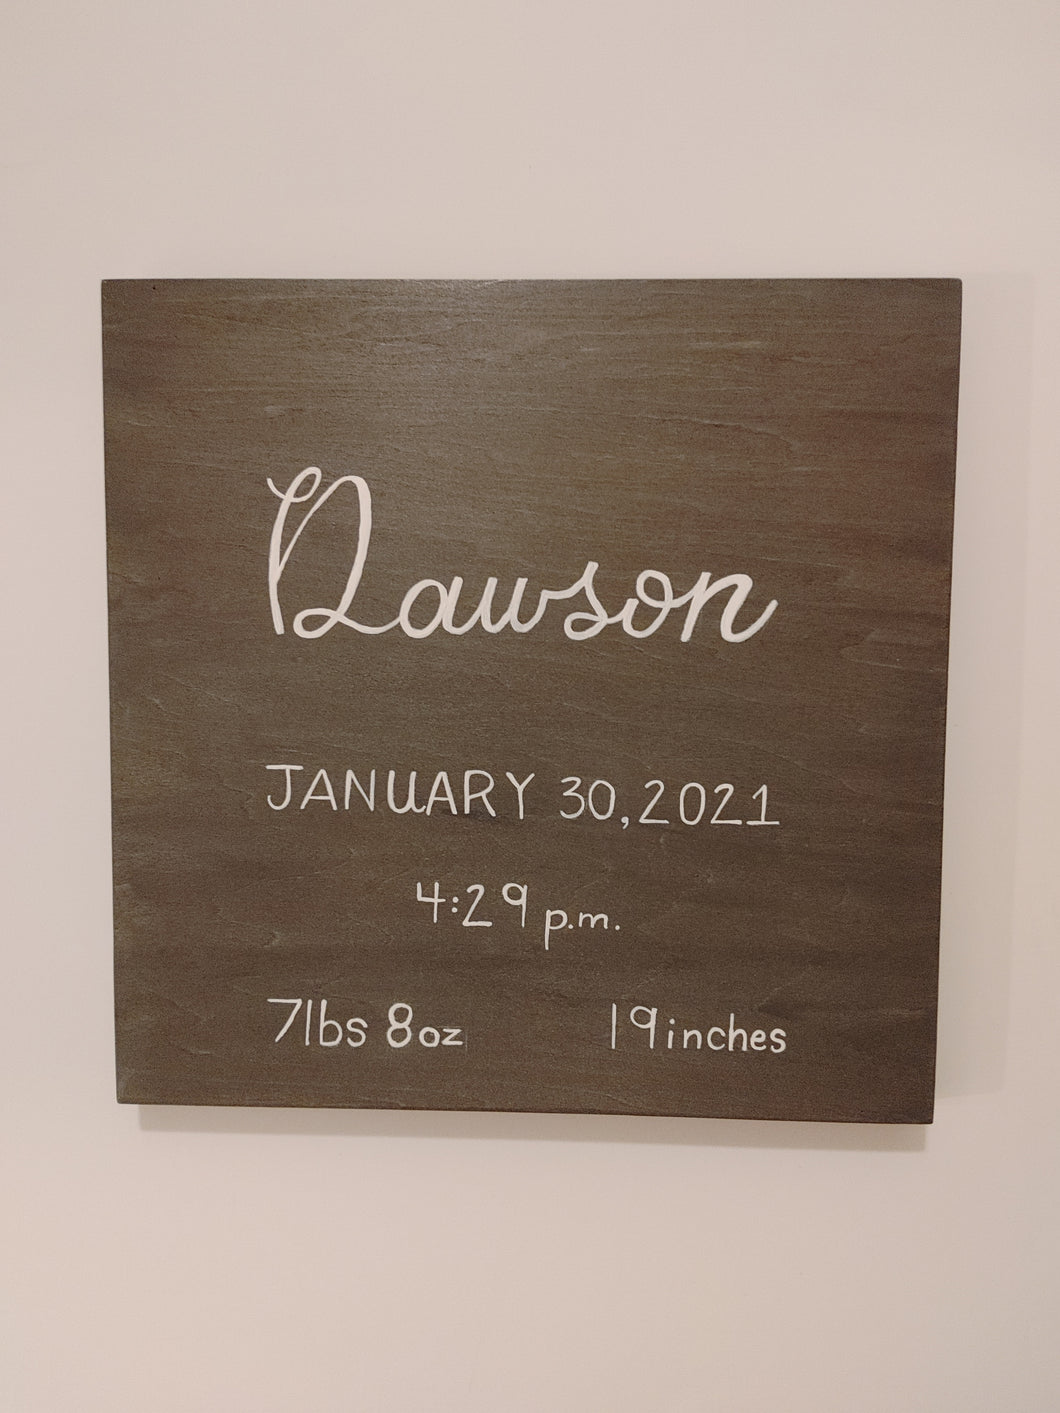  This 12x12 inch  wood sign is customized with your child’s name written in white calligraphy, birth date, time, weight, and length in grey stain colour. 